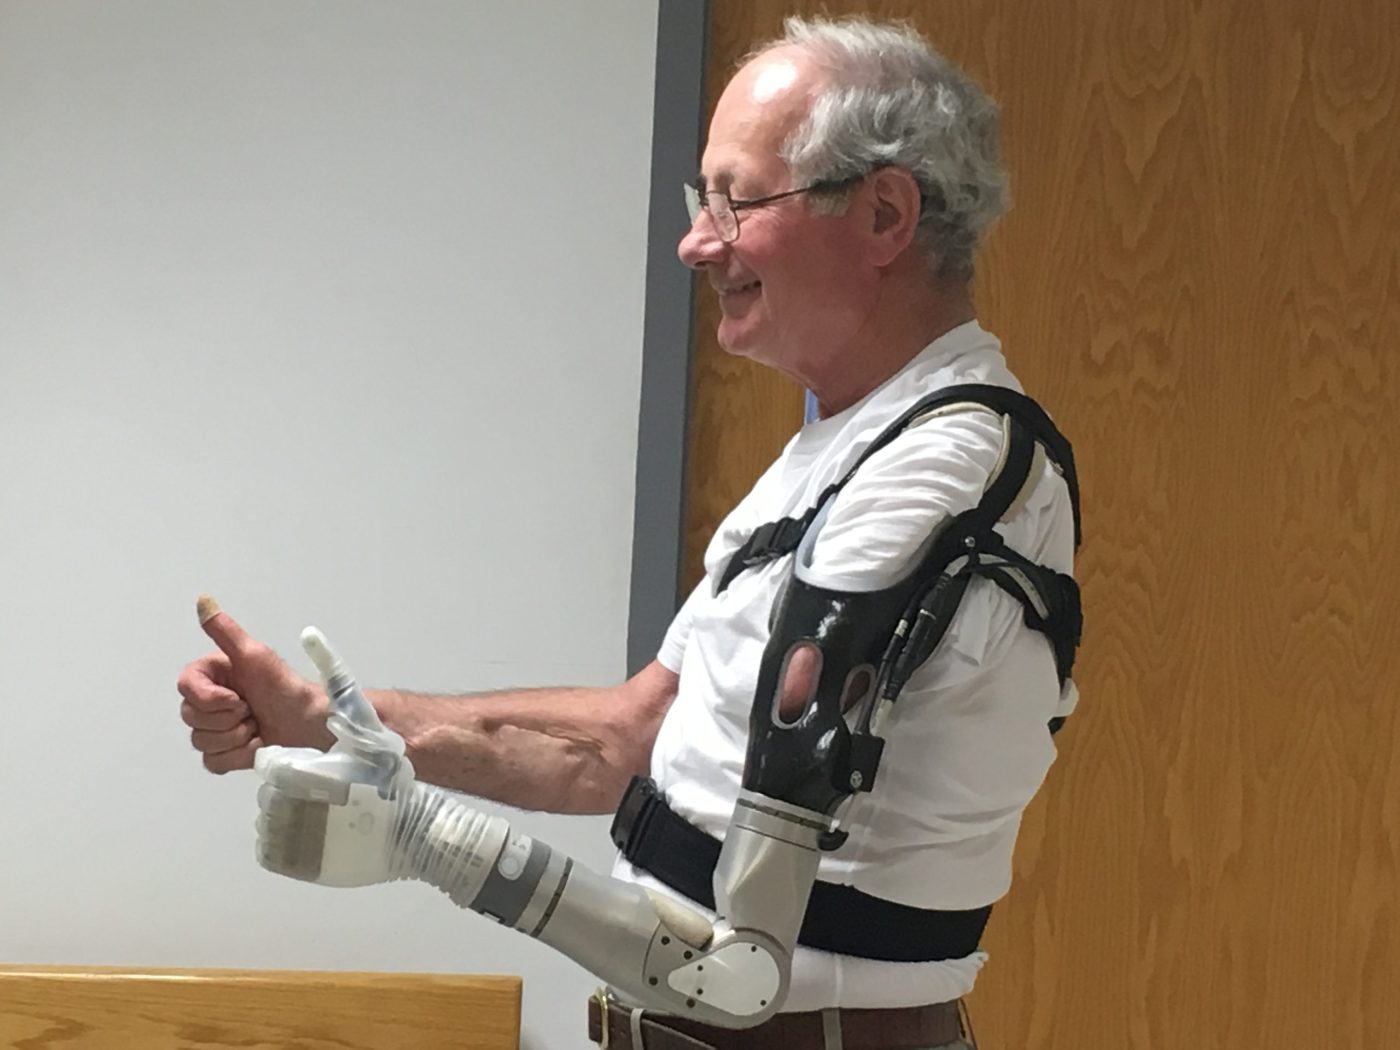 Much decorated Vietnam Veteran and former VA executive Frederick Downs, Jr., gives a thumbs up while demonstrating the fluid movements possible with the LUKE arm. At an event hosted by VA in 2017, Downs and another Veteran became the first recipients of the artificial arm. (darpa.mil)